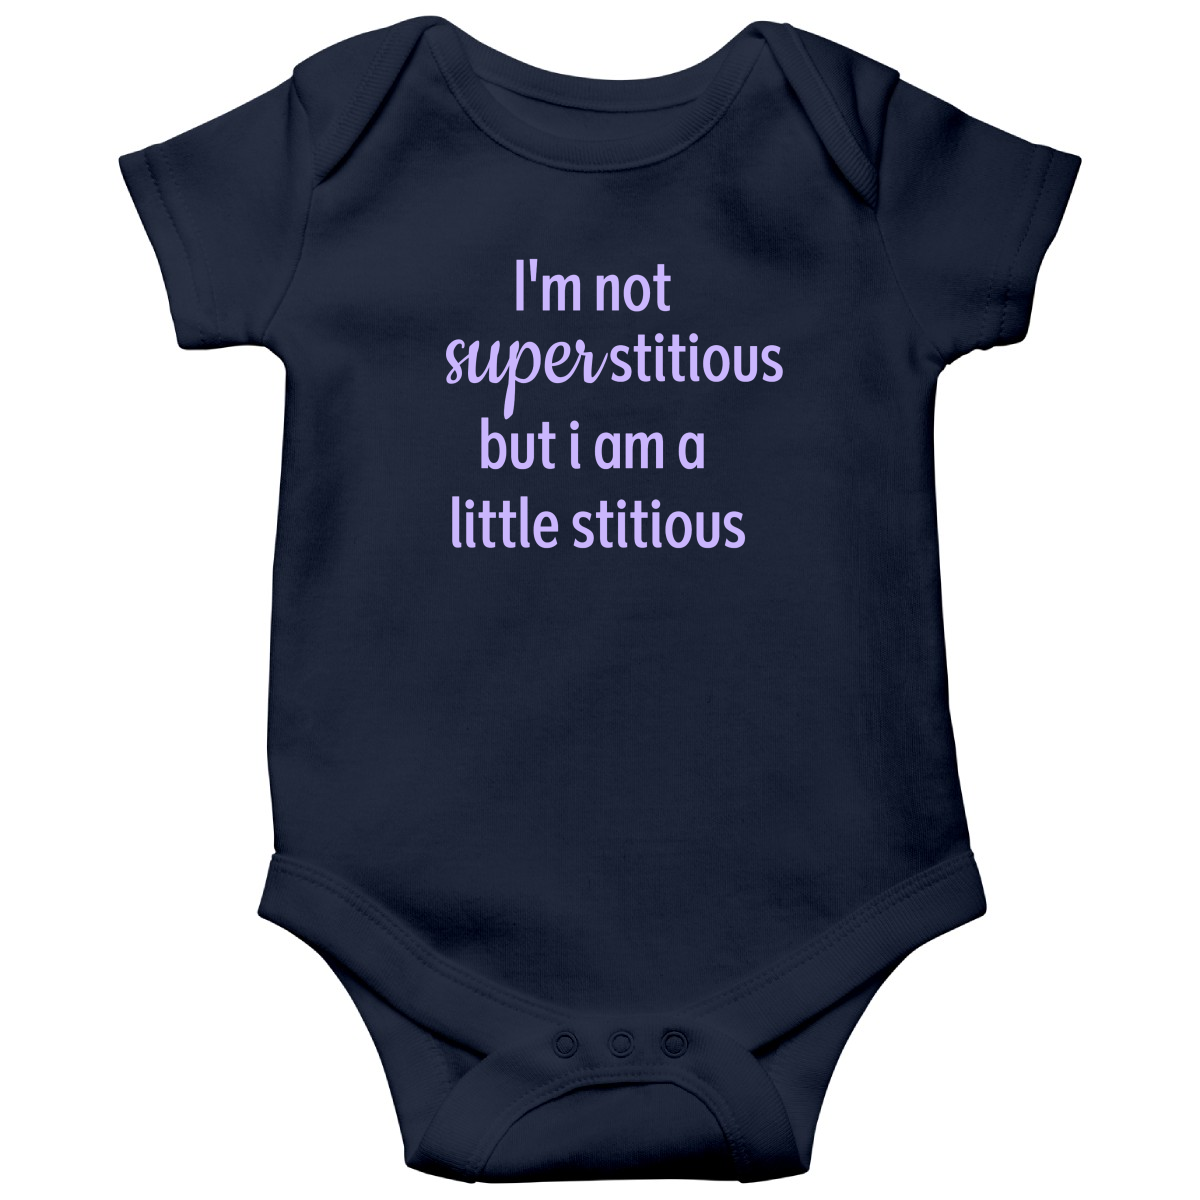 I'm Not Superstitious but I am a Little Stitious Baby Bodysuits | Navy